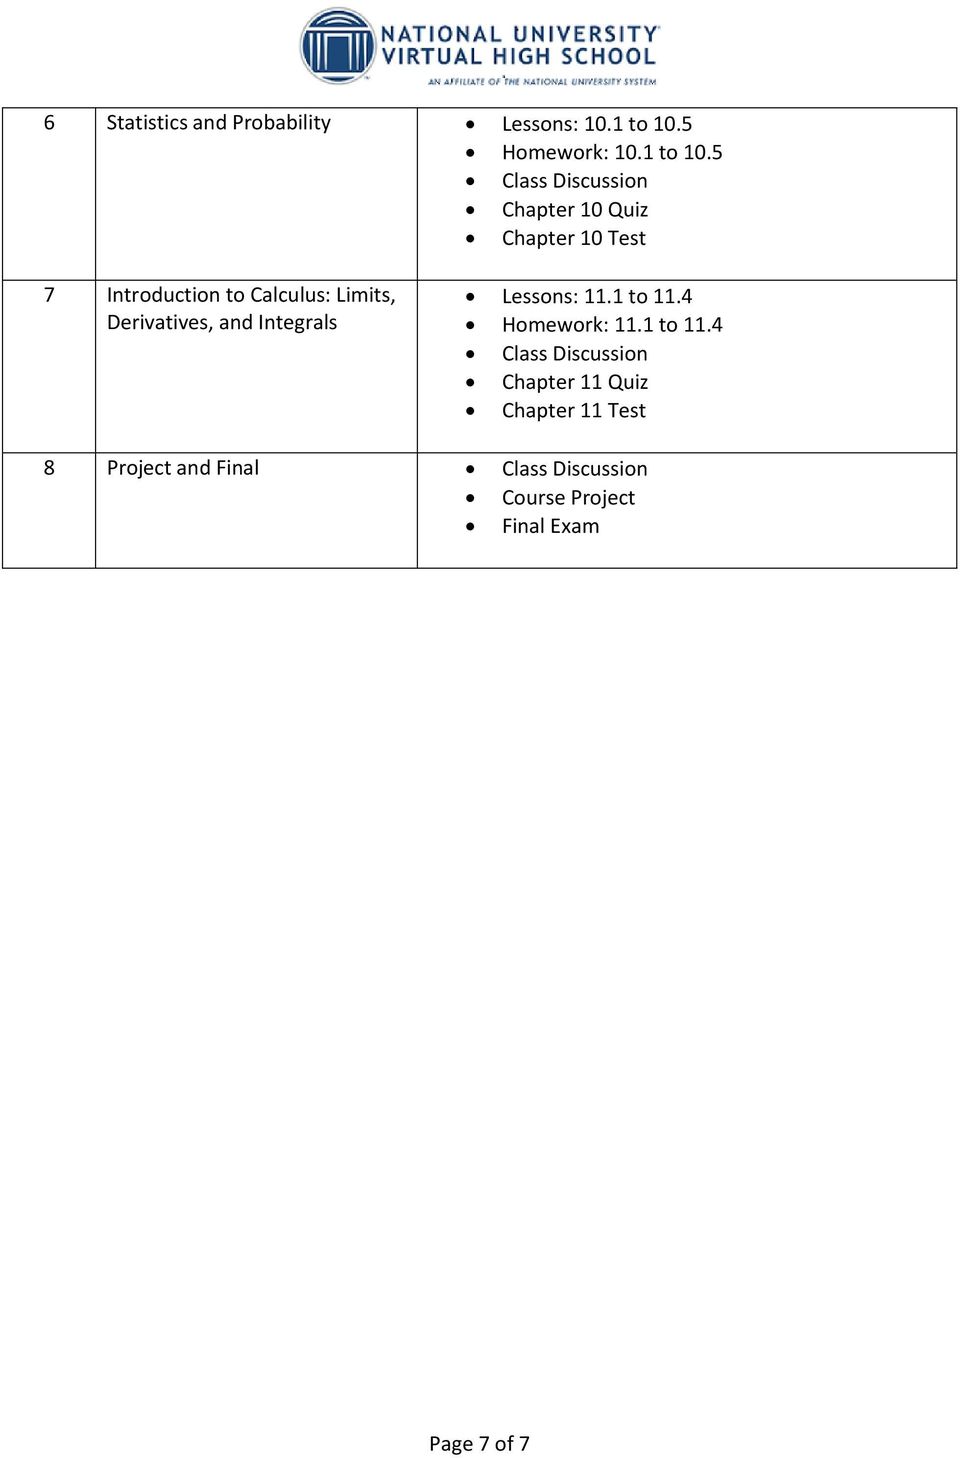 5 Class Discussion Chapter 10 Quiz Chapter 10 Test 7 Introduction to Calculus: Limits,